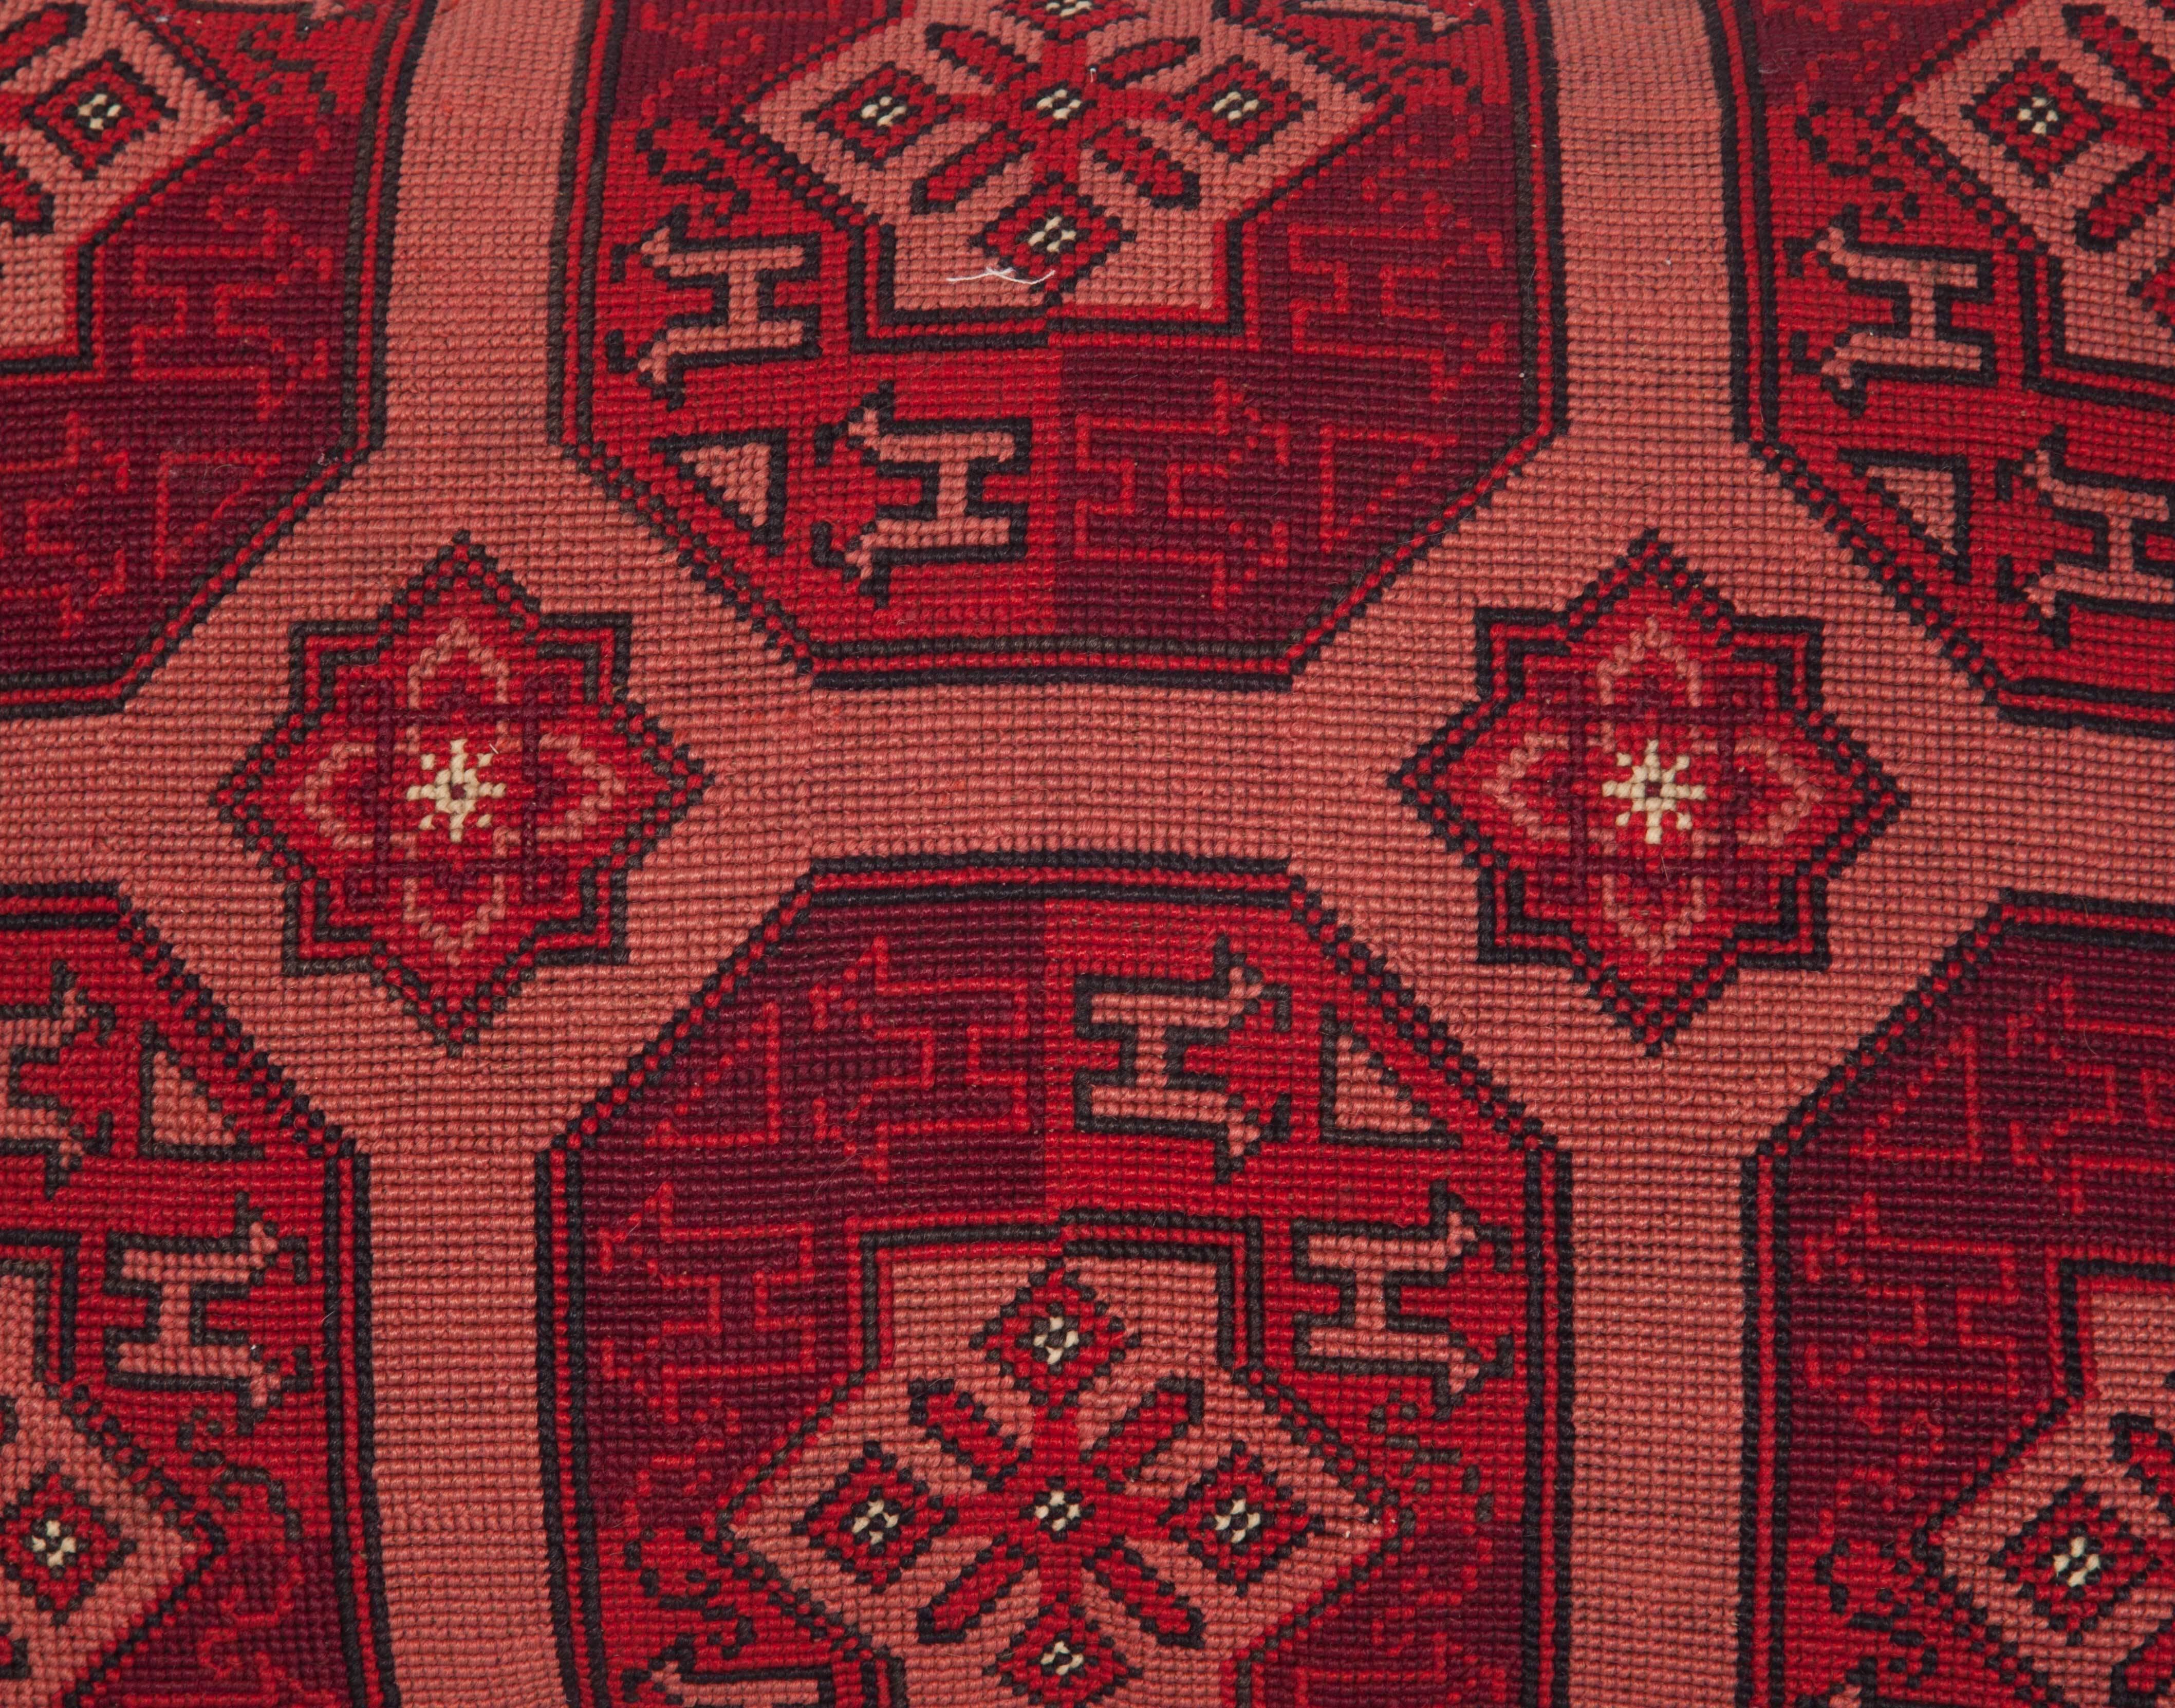 Embroidered Pillow Made Out of an Early 20th Century Central Asian Cross Stitch Embroidery